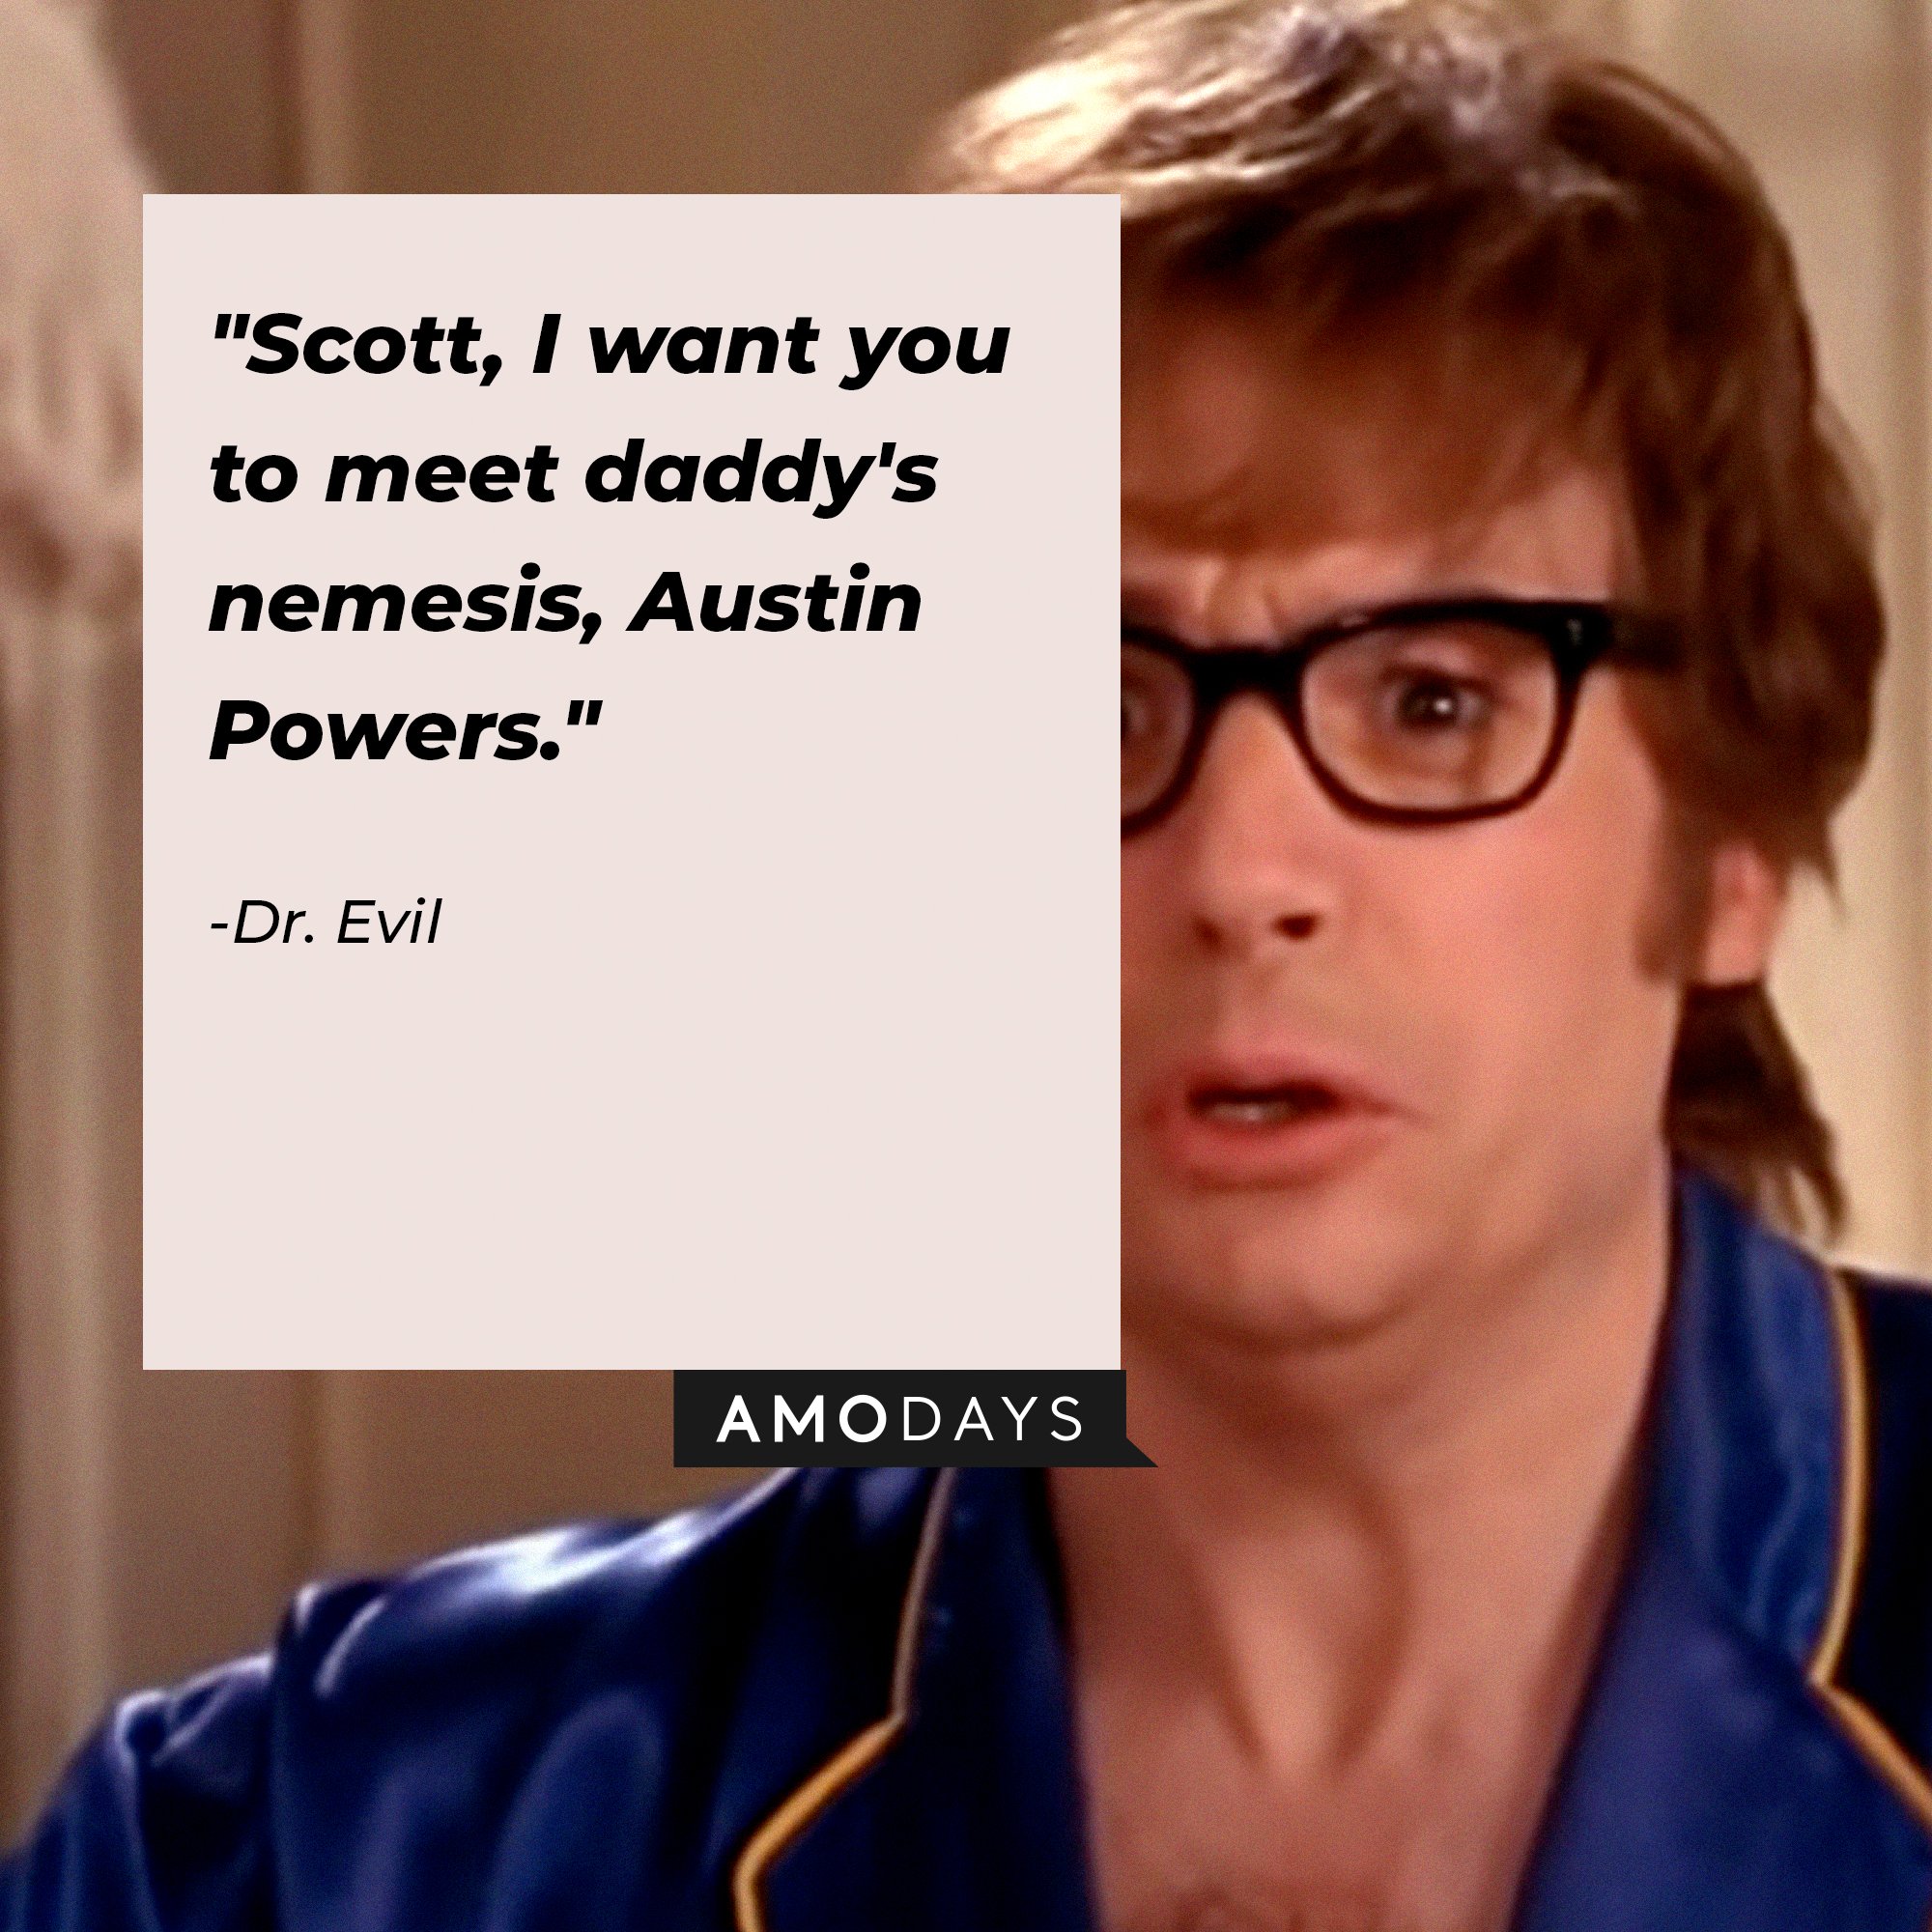  Dr. Evil’s quote: "Scott, I want you to meet daddy's nemesis, Austin Powers." | Image: Amodays